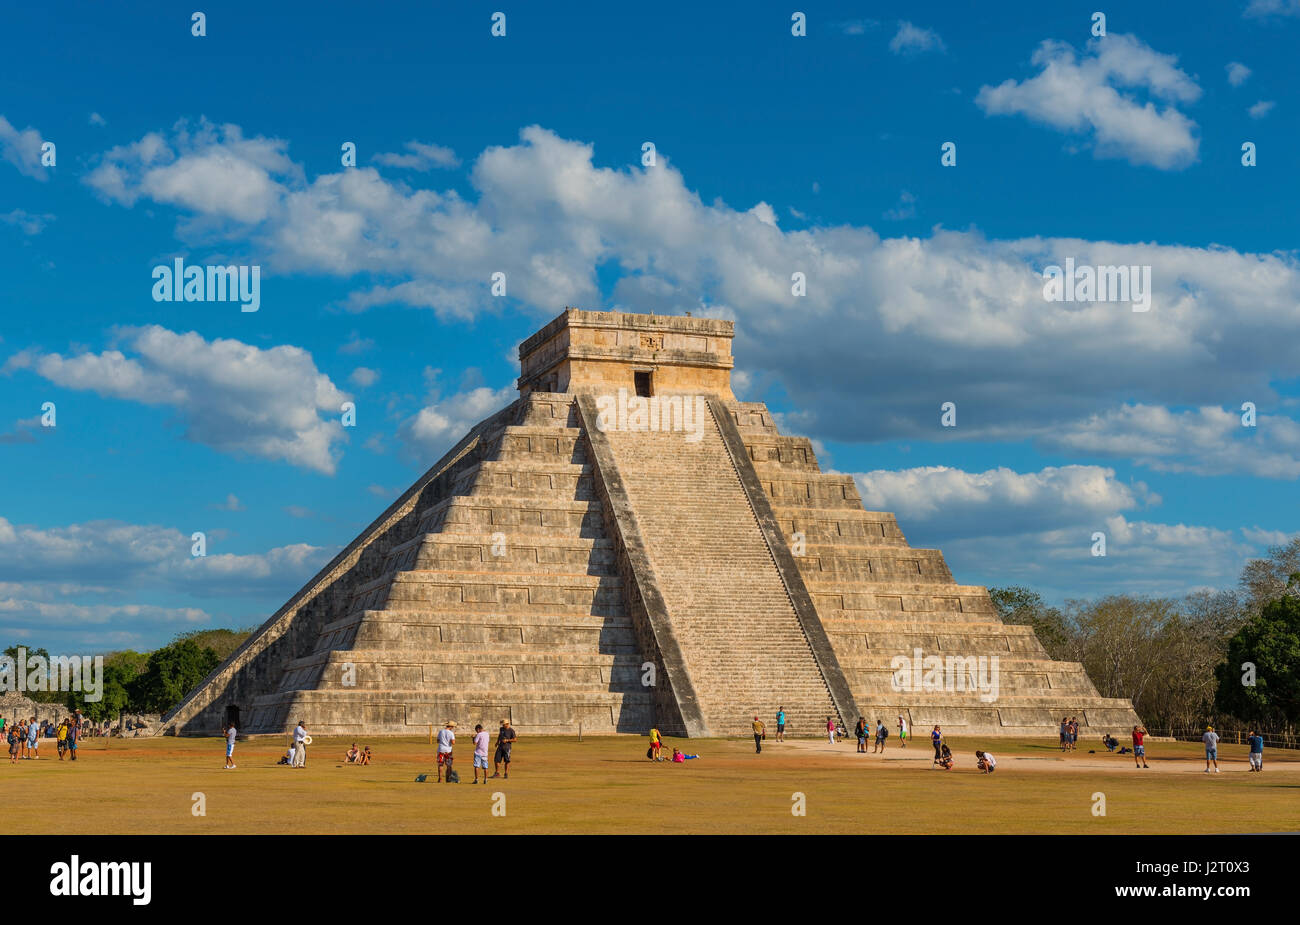 El Castillo maya pyramid during summer solstice with the snake shadow by the stairs with tourists enjoying the view in Chichen Itza, Yucatan, Mexico. Stock Photo